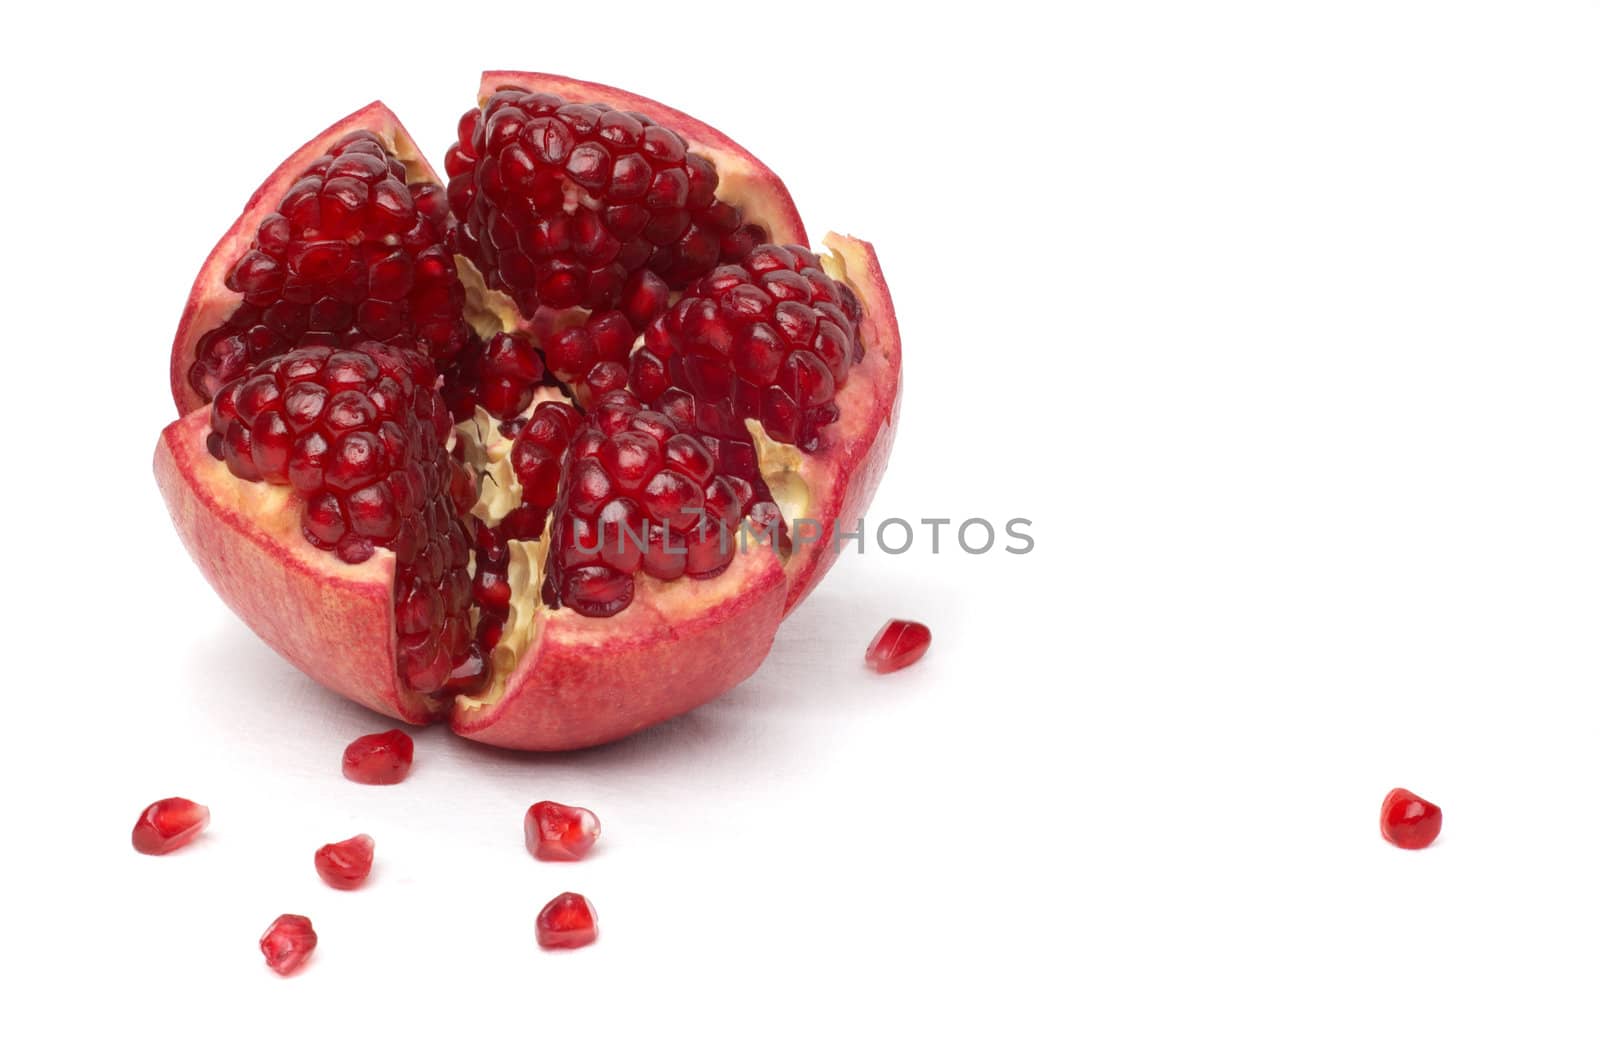 broken pomegranate and seeds by starush